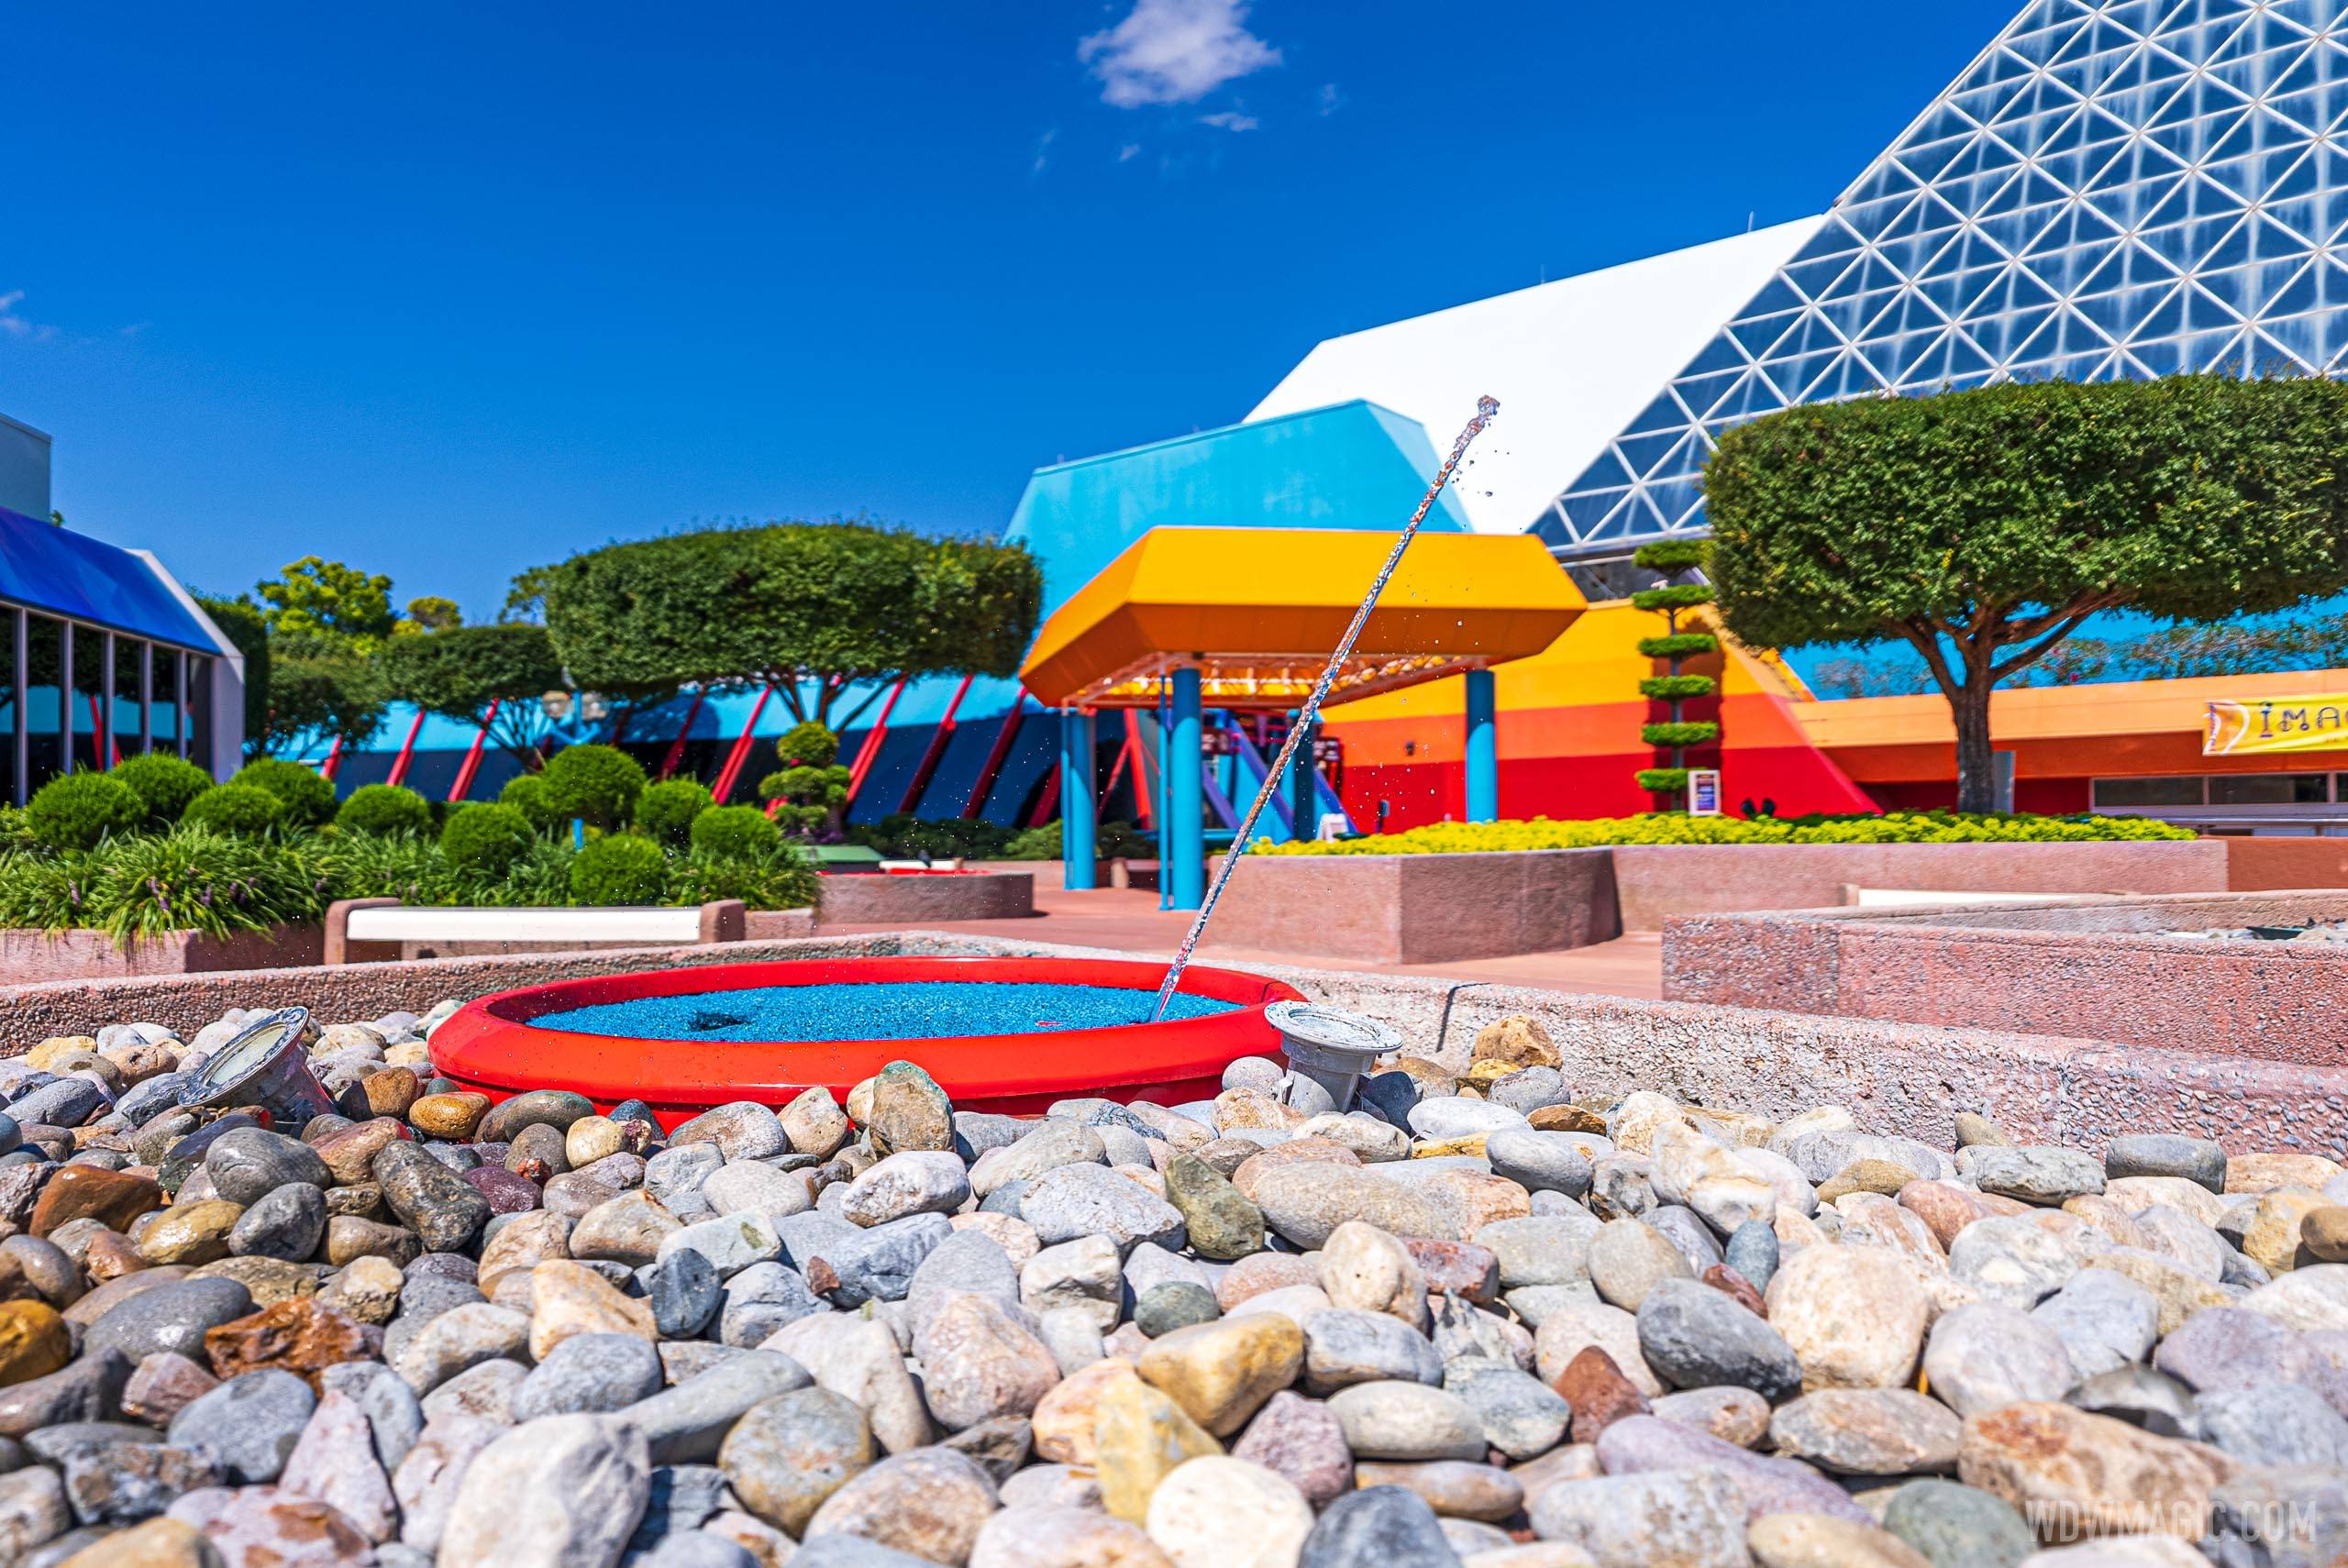 Fountains and Splash pads reopen at Walt Disney World theme parks